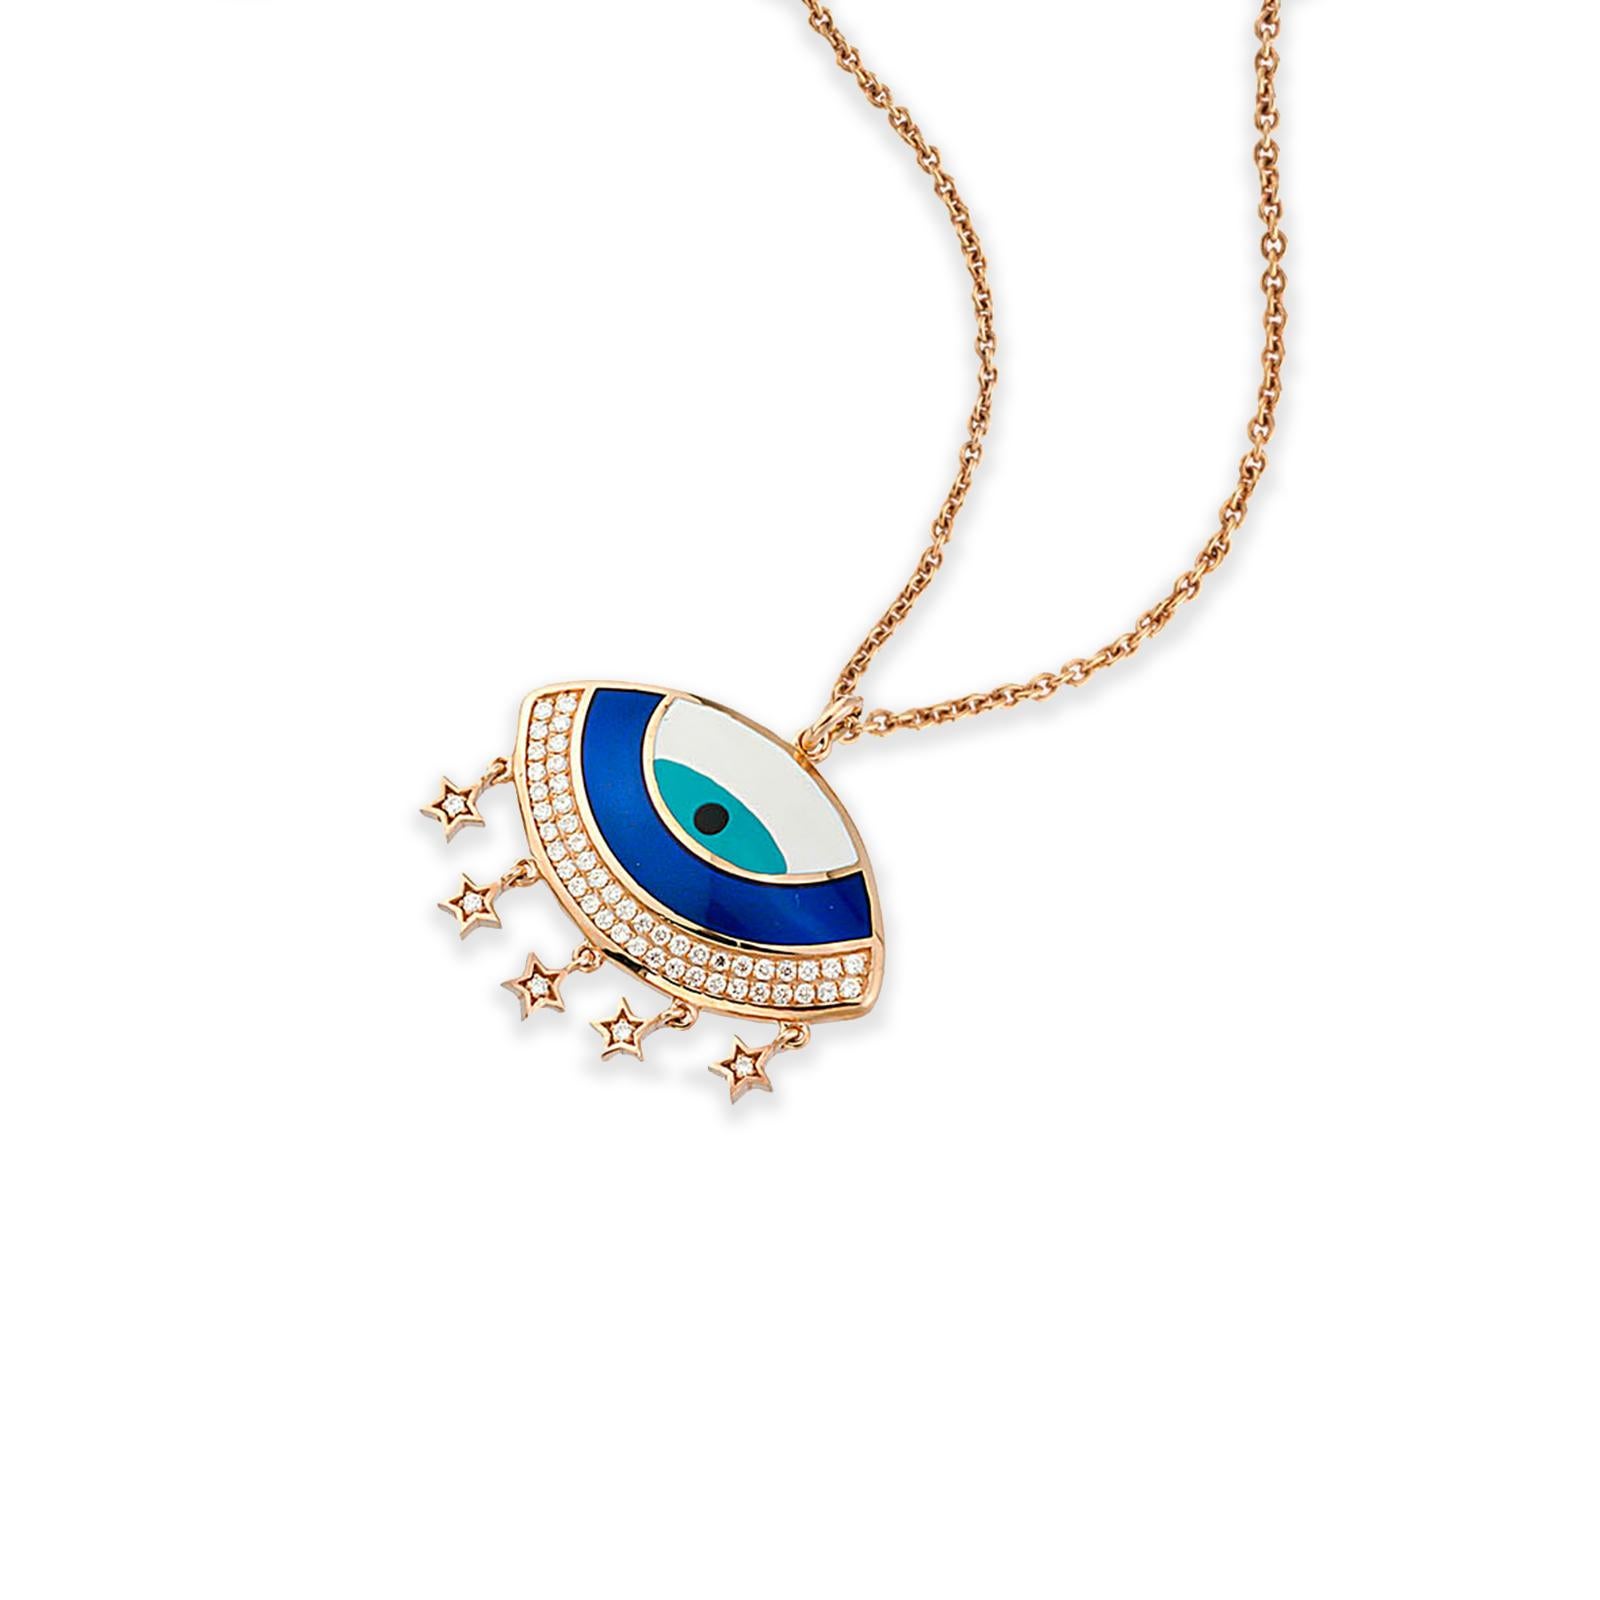 This Unique Evil Eye and Star Charm Necklace are Crafted in 18K Rose Gold and Encrusted With .32 Carat Diamonds. The Center of the Eye Features a Blue, Turquoise, and White Enamel

The evil eye is a malicious glare given to someone out of spite,